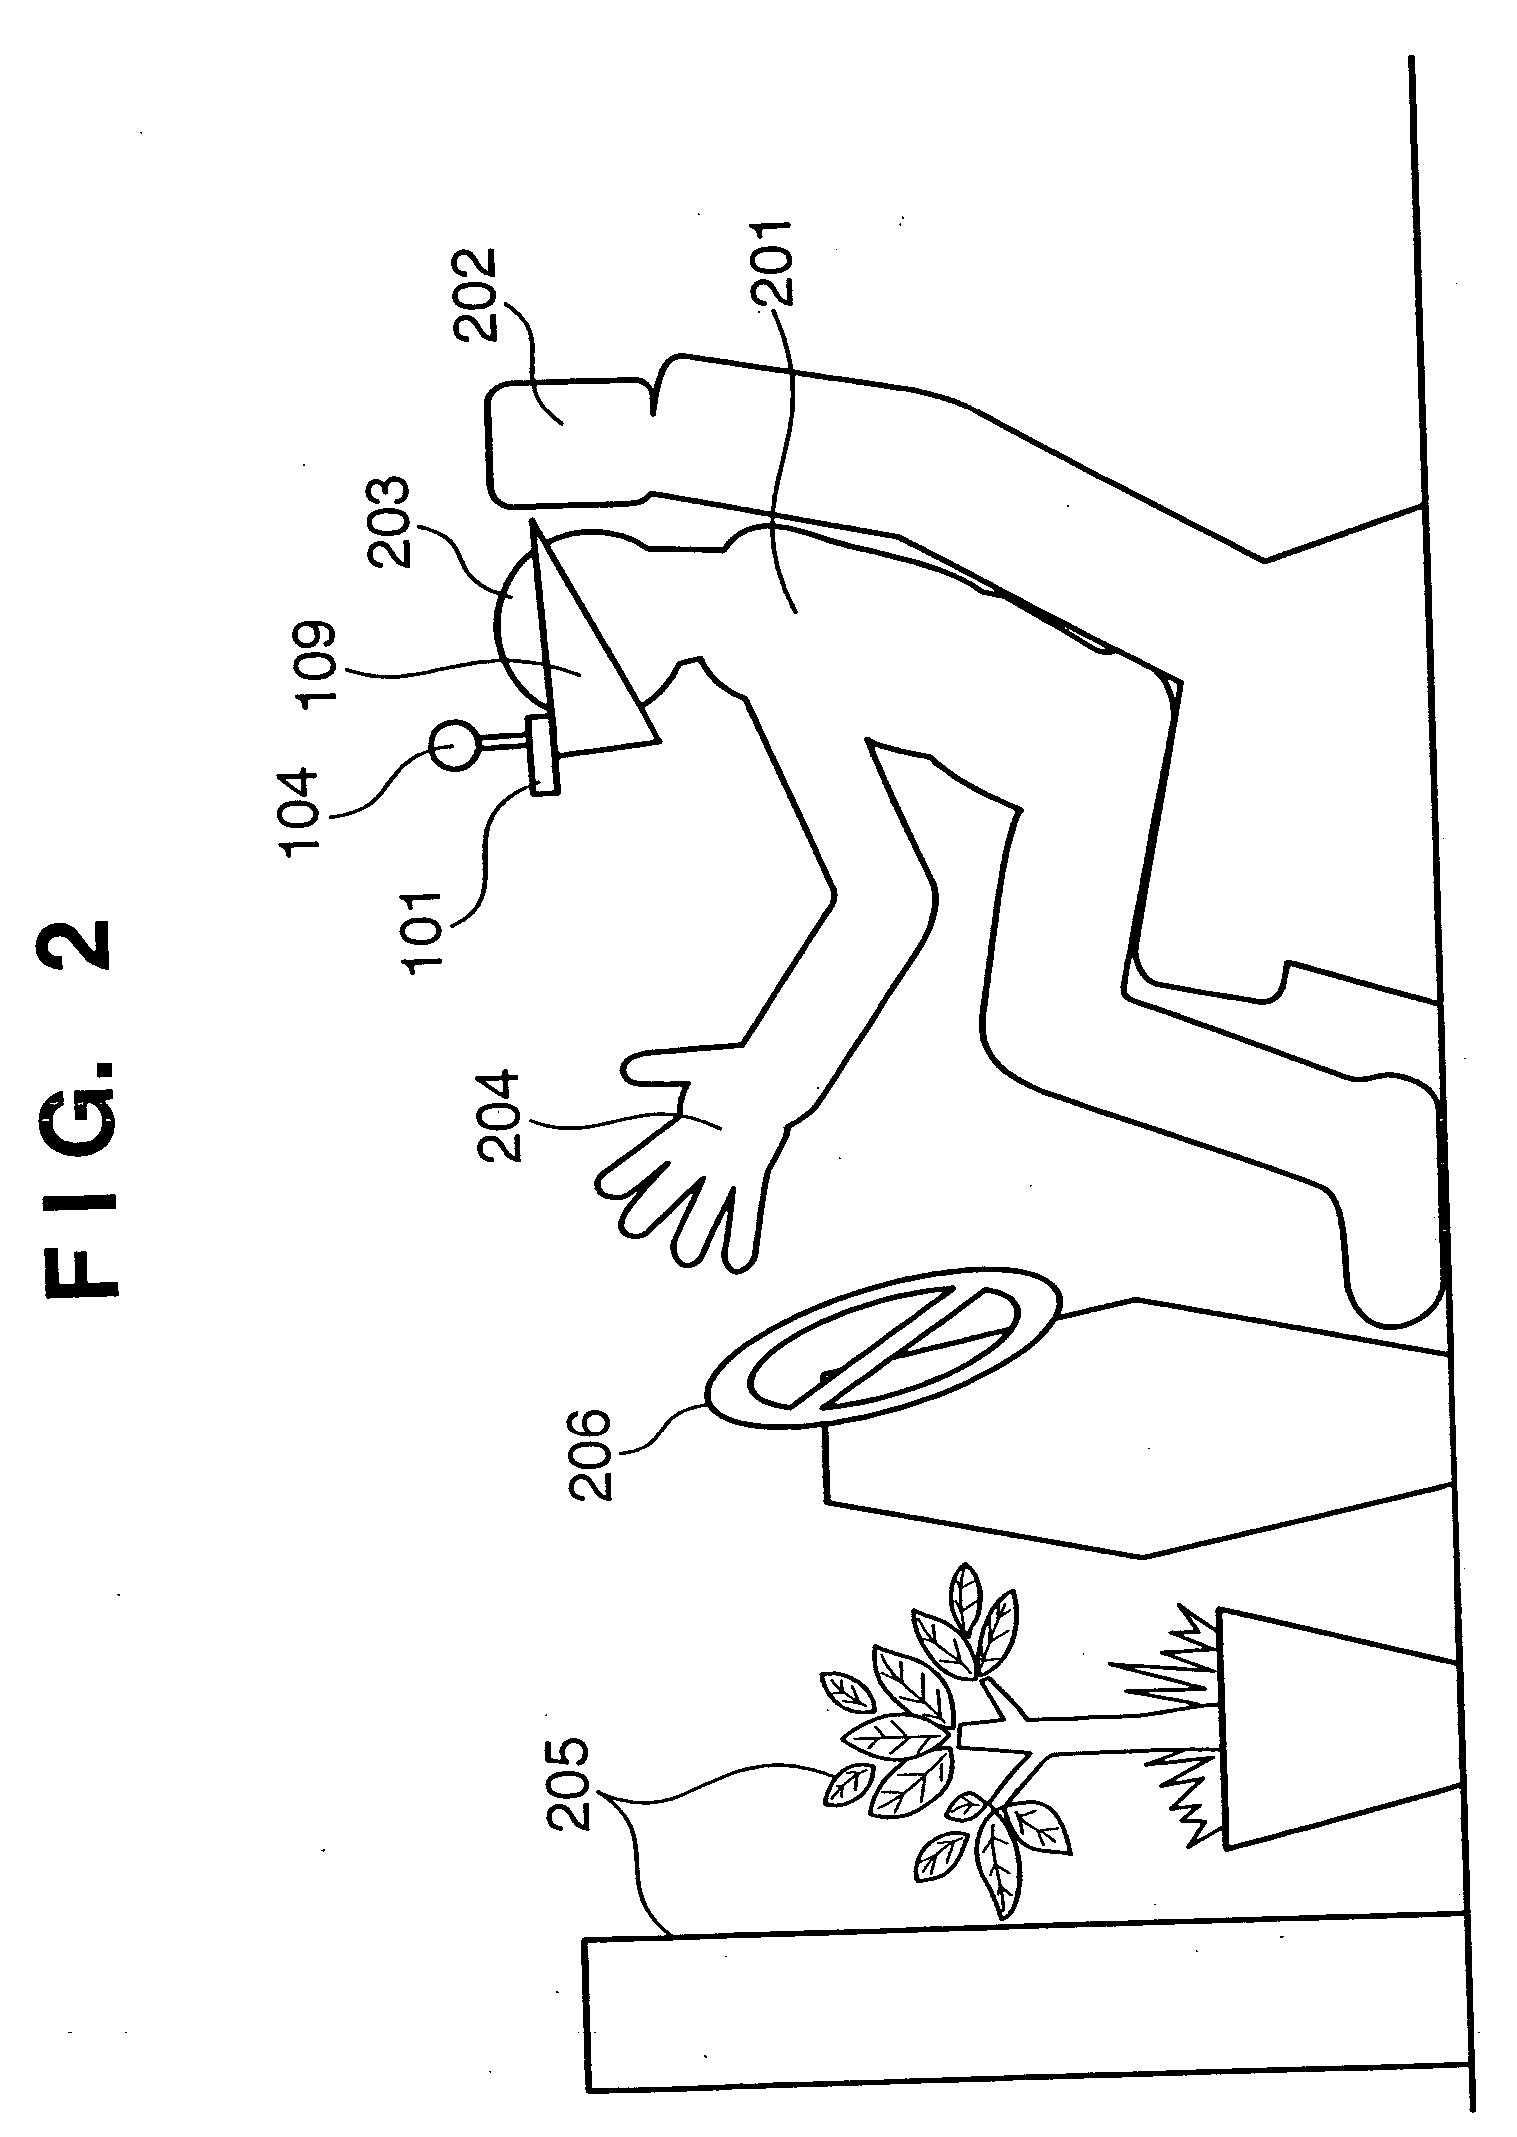 Correction of subject area detection information, and image combining apparatus and method using the correction